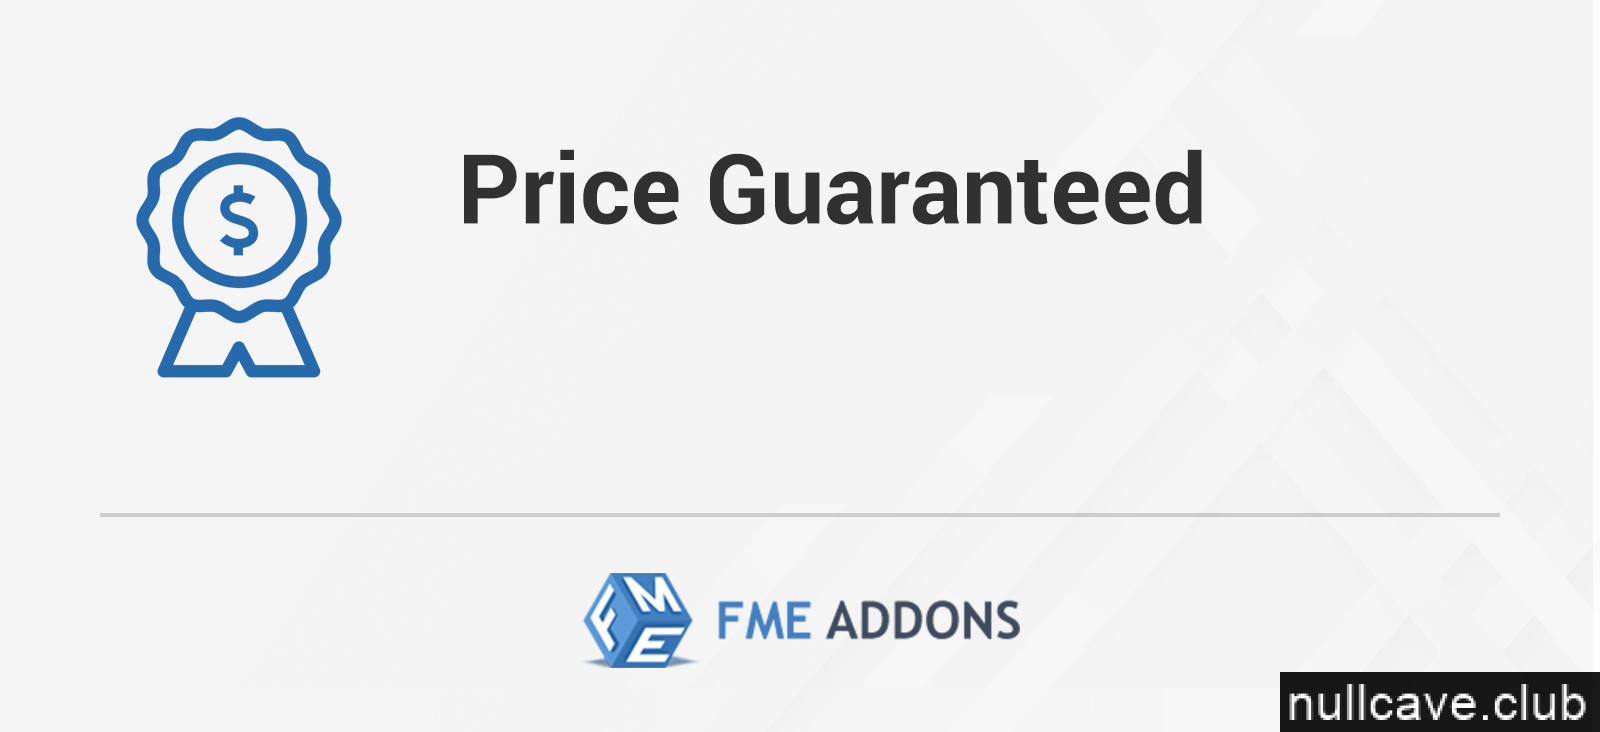 Price Guaranteed for WooCommerce
						
						
							1.0.3